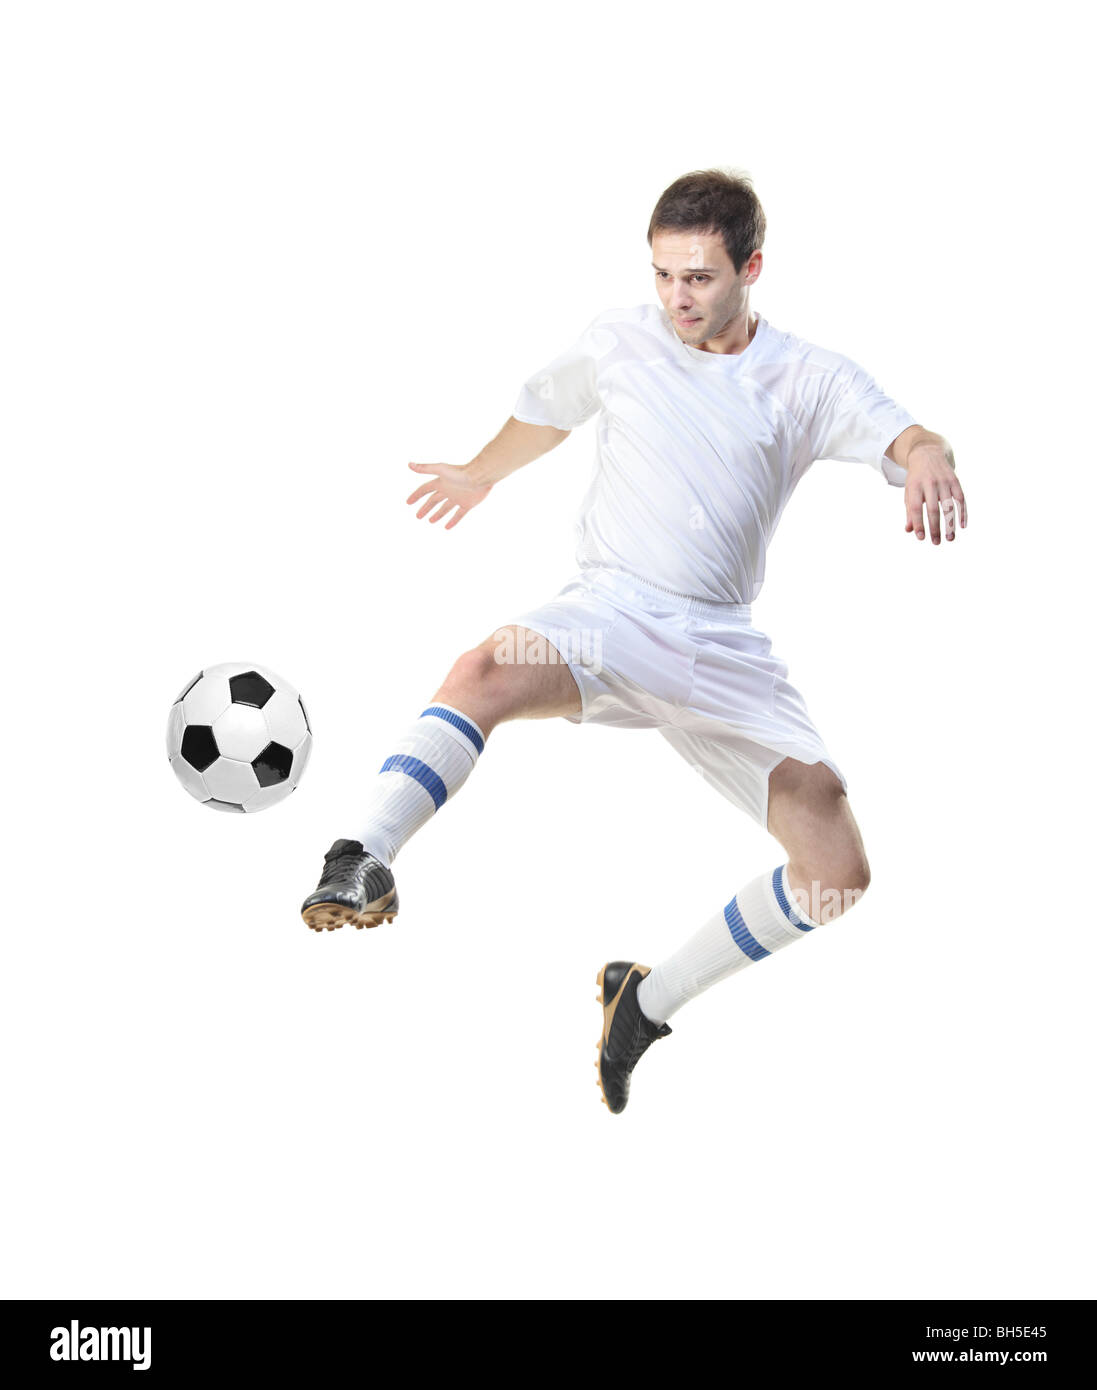 Soccer player with a ball  isolated on white background Stock Photo